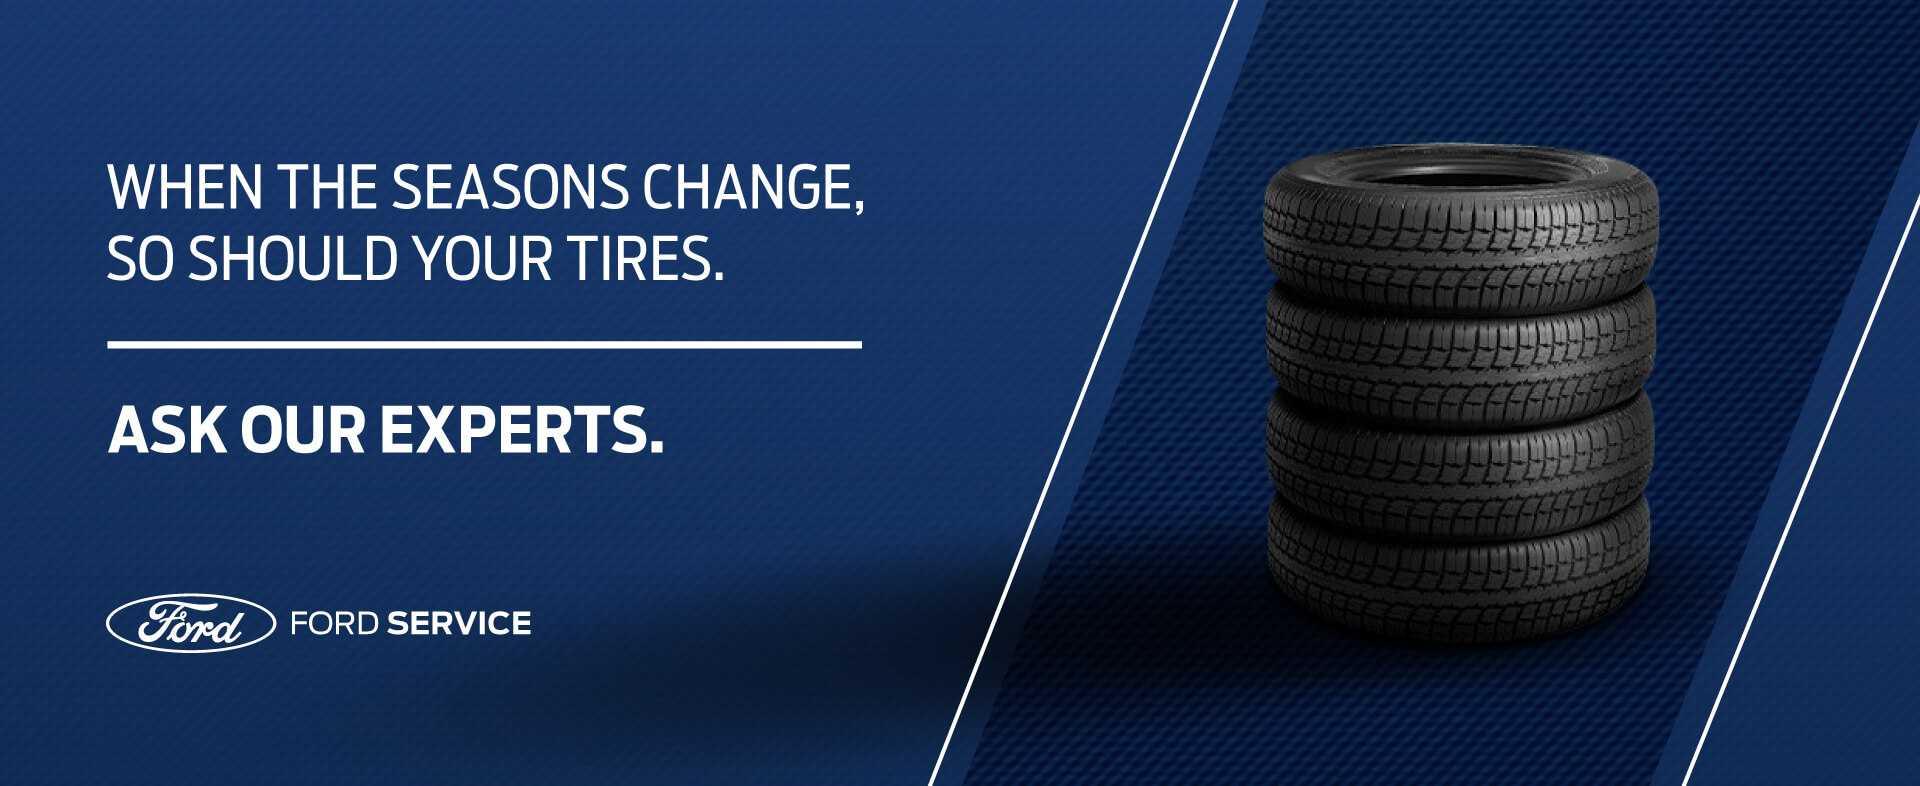 When the seasons change, so should your tires. Ask our experts.